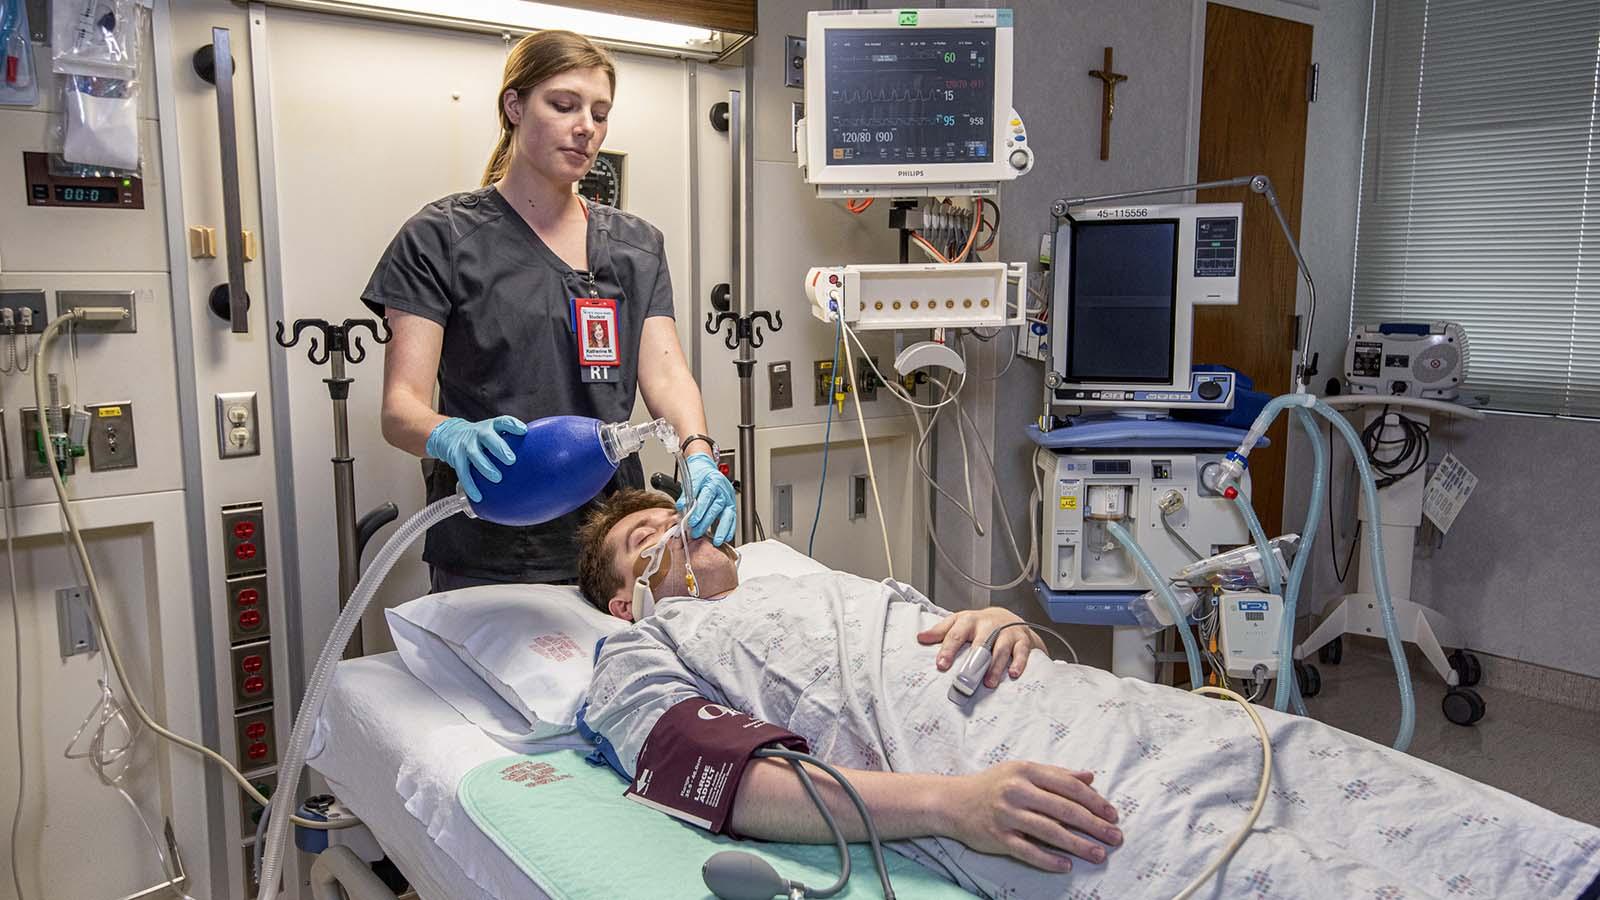 Respiratory therapist intubating patient in hospital